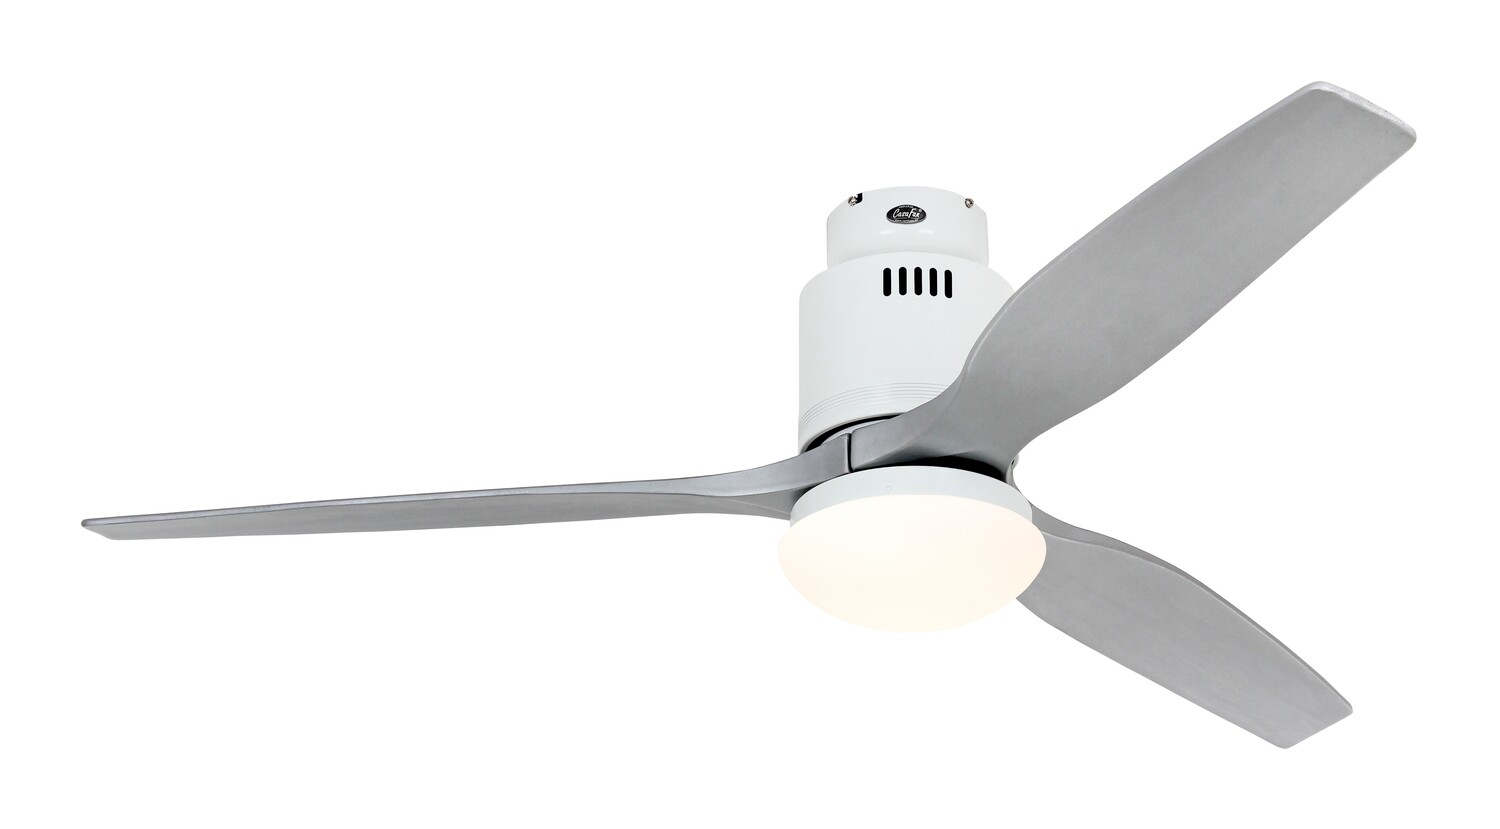 AERODYNAMIX ECO WE energy saving ceiling fan by CASAFAN Ø132 with light kit and remote control included - White /Silver grey